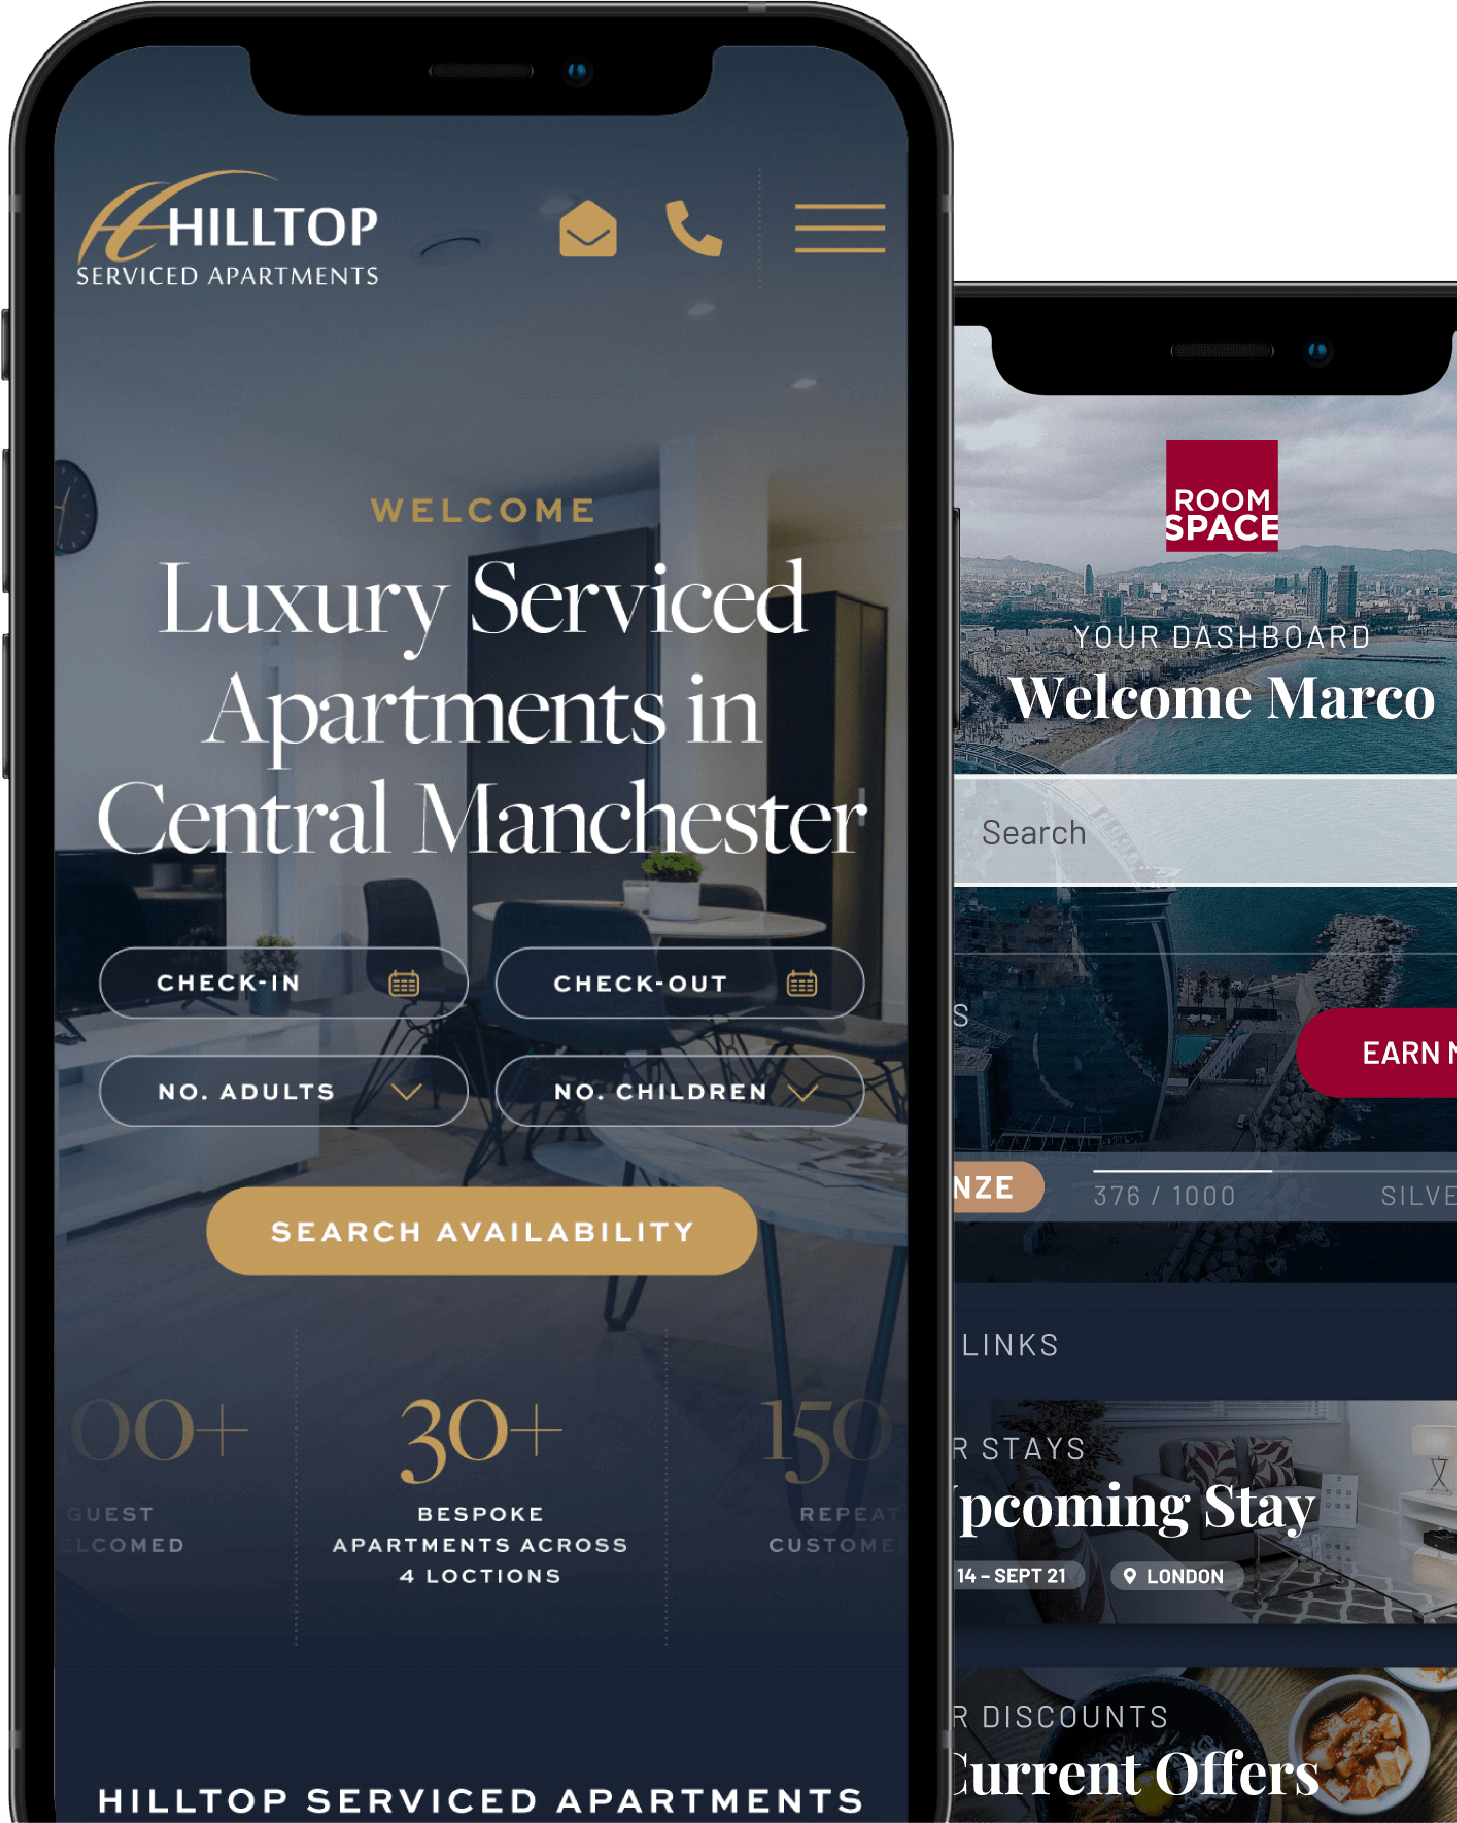 Two phone frames, one in front of the other. The first phone shows the Hilltop website homepage on screen, while the back shows the Roomspace website homepage on screen